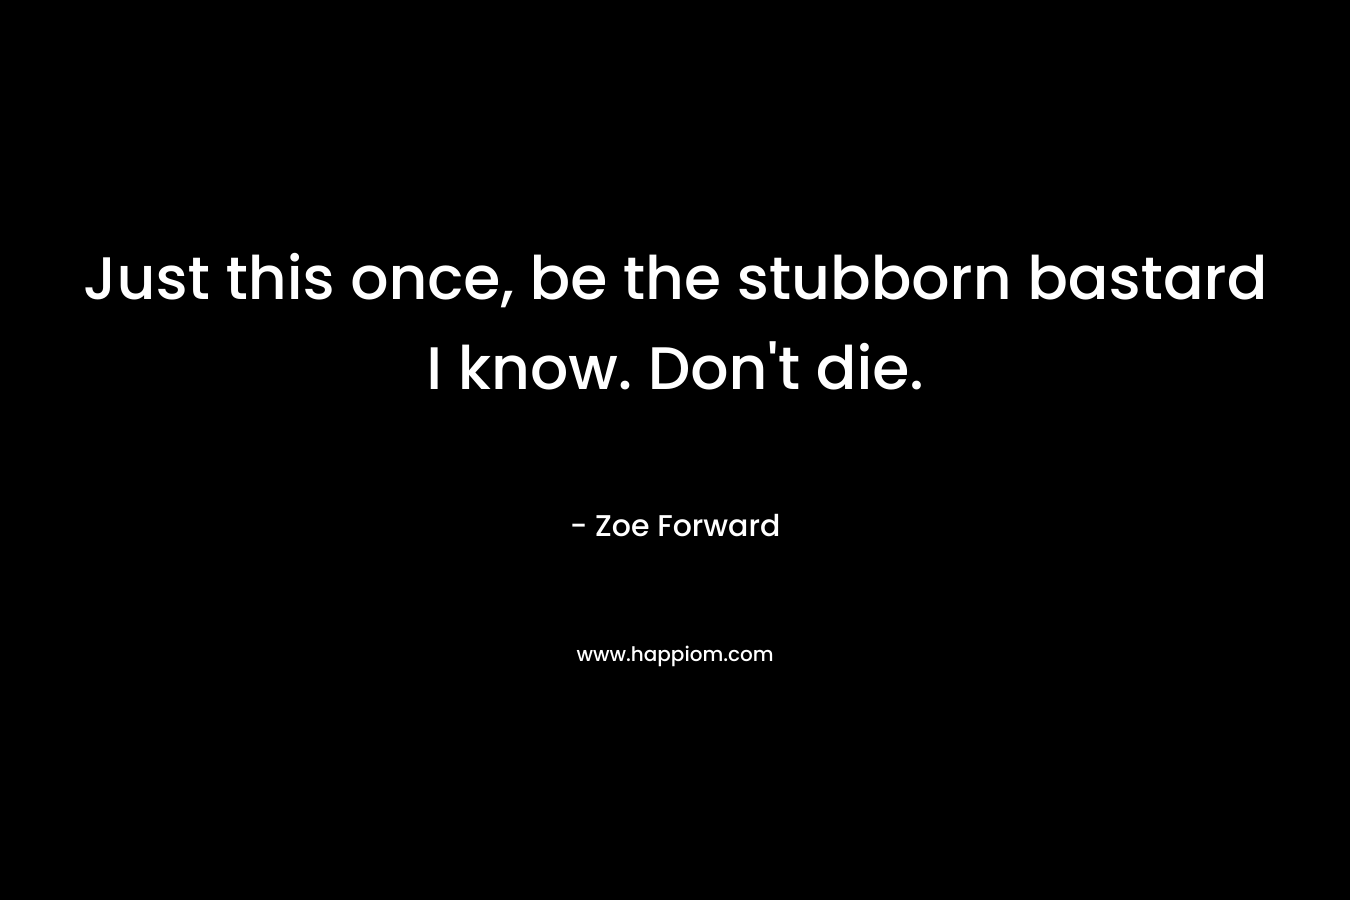 Just this once, be the stubborn bastard I know. Don’t die. – Zoe Forward